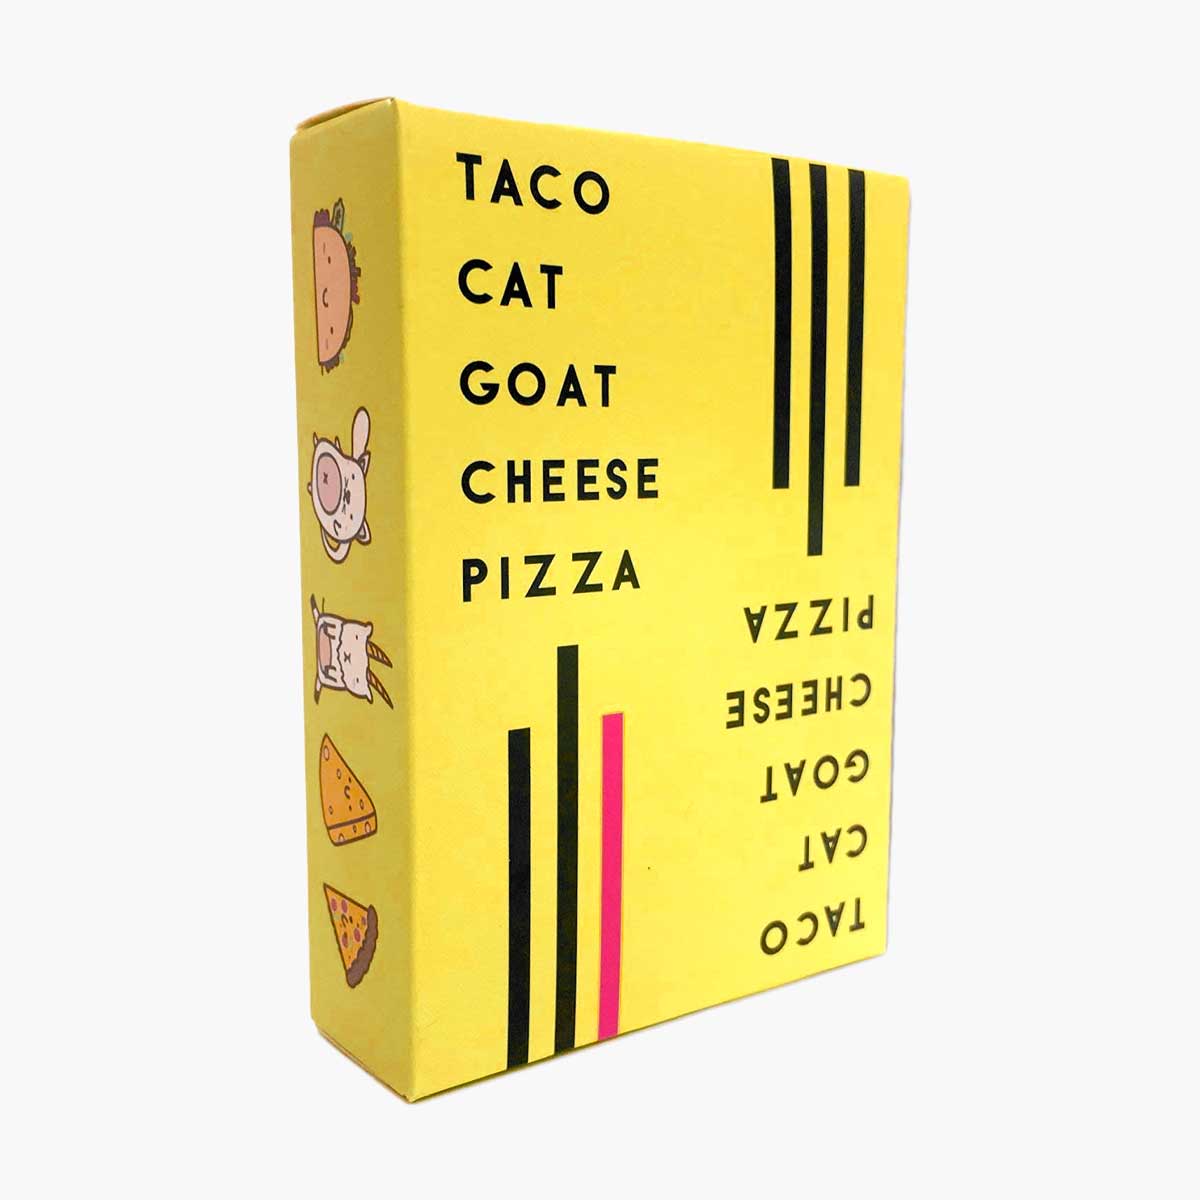 A game of Taco Cat Goat Cheese Pizza, one of the items for everything you could possibly need for taco night at home.